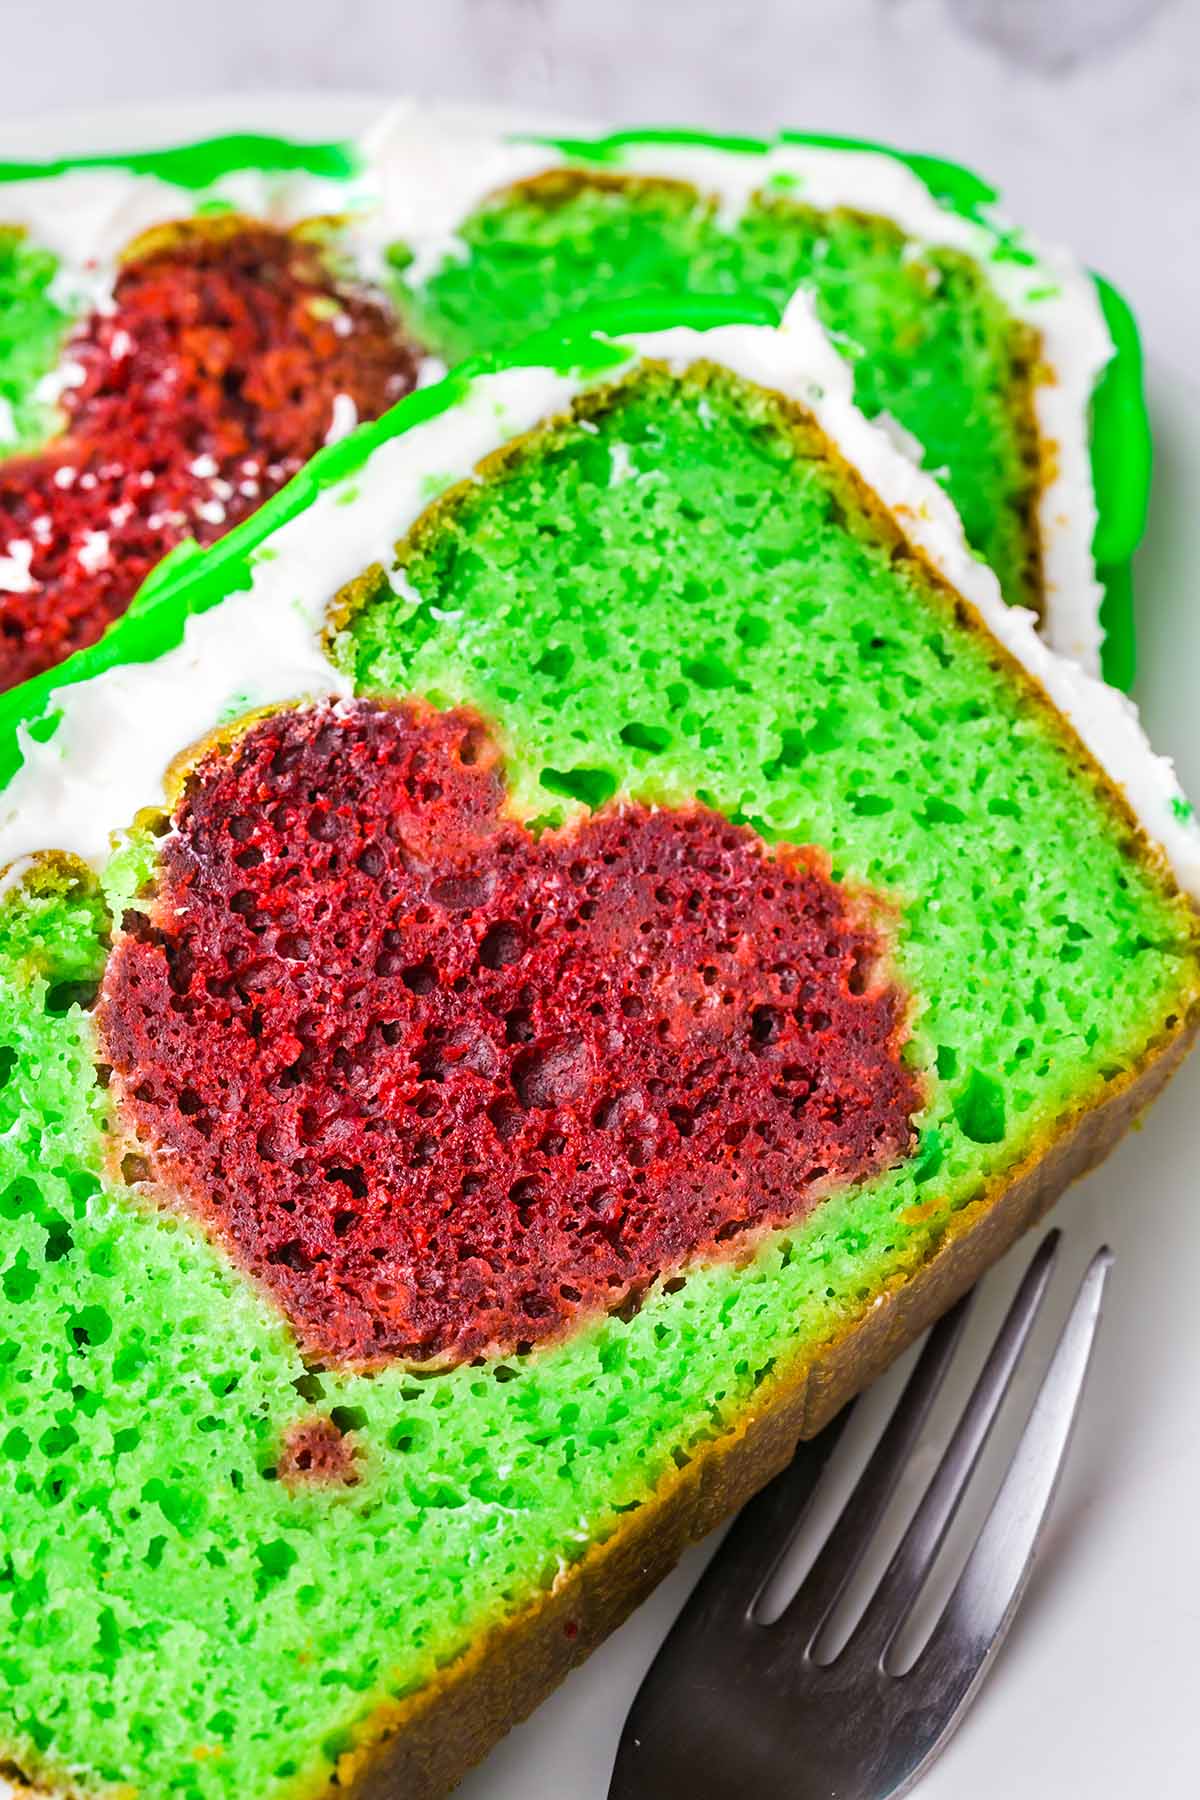 Grinch Cake with a hidden heart in the middle of the cake.